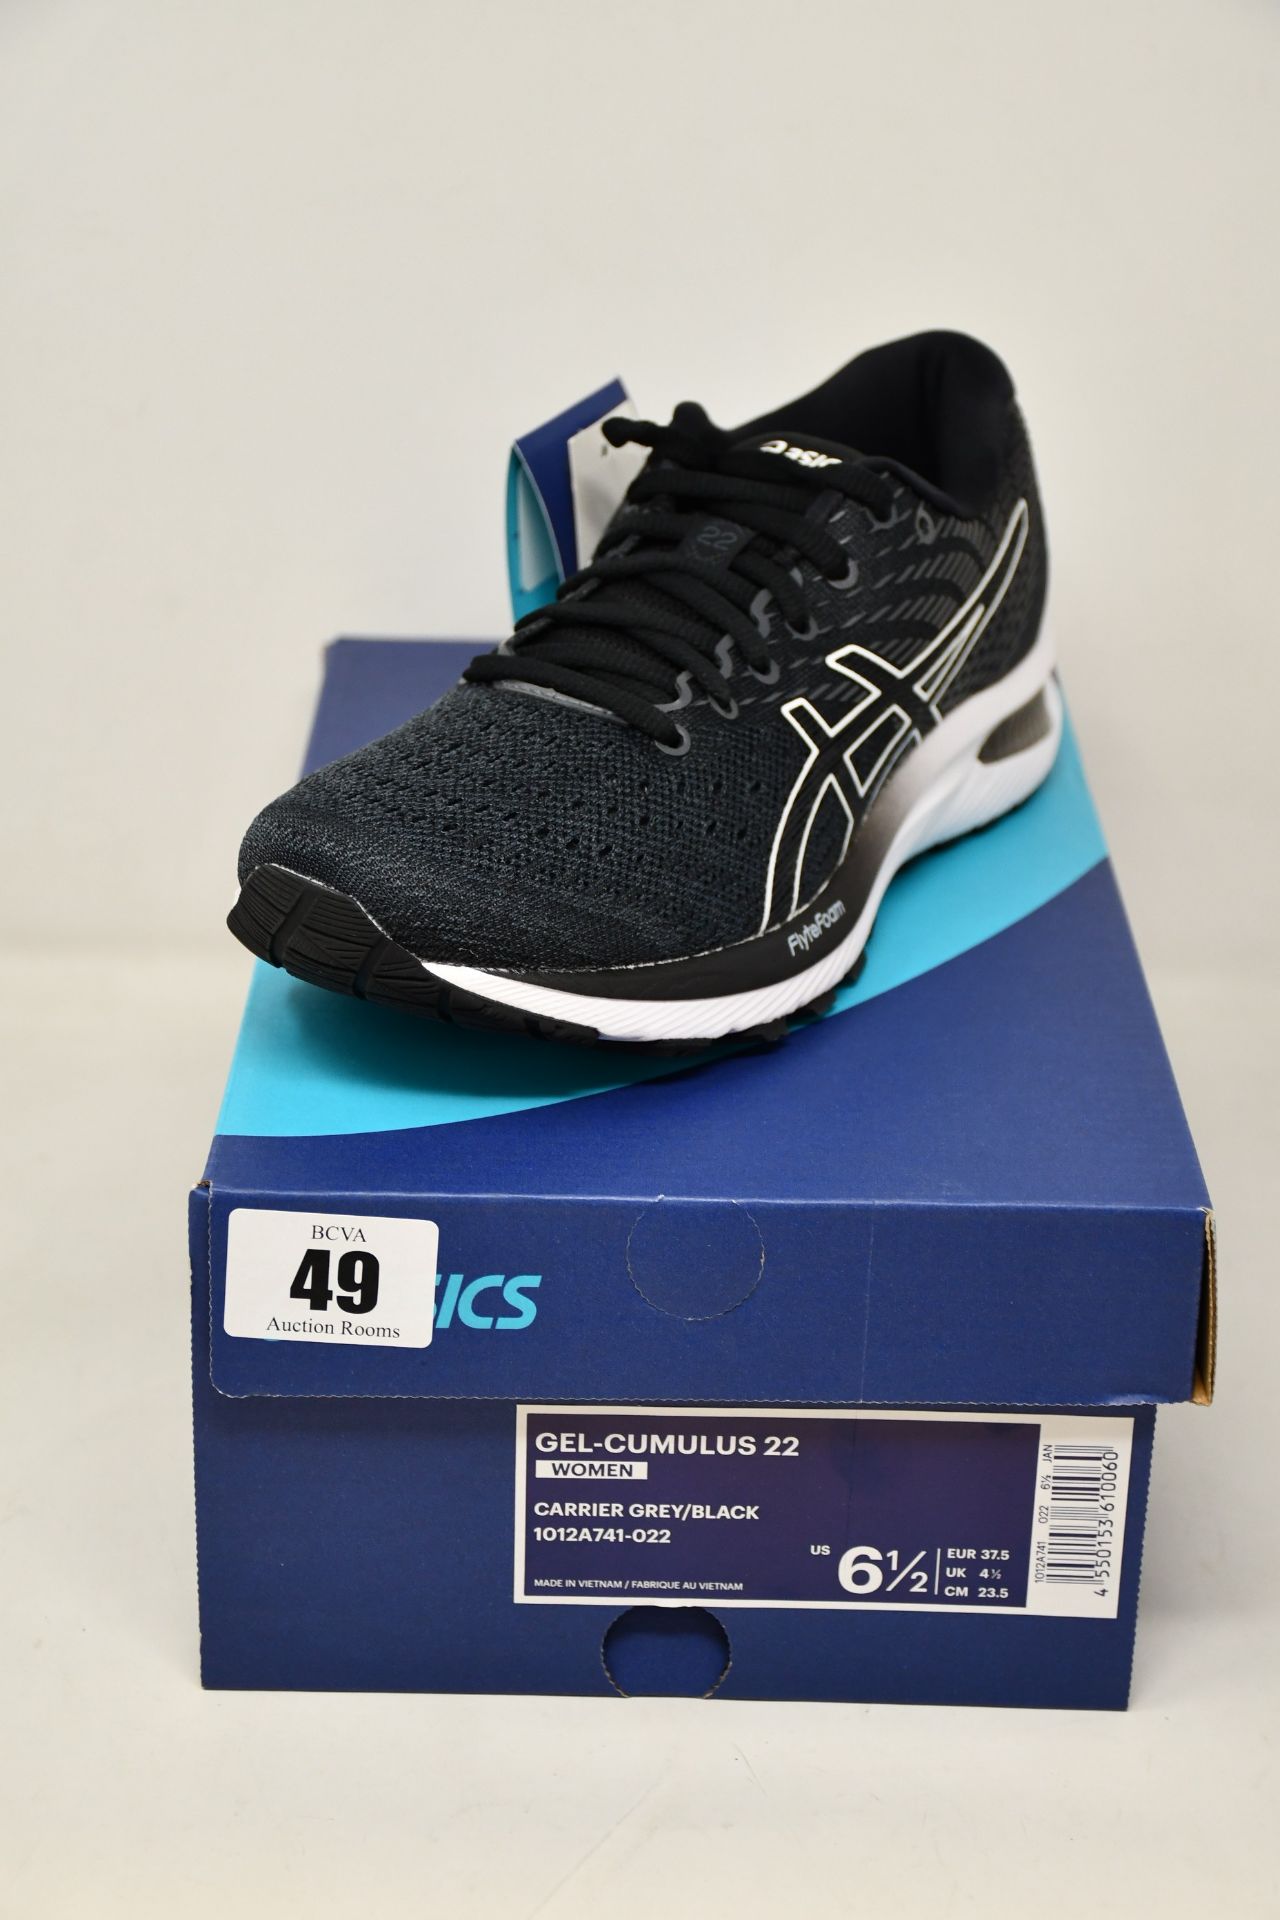 A pair of women's as new Asics Gel-Cumulus 22 trainers (UK 4.5).